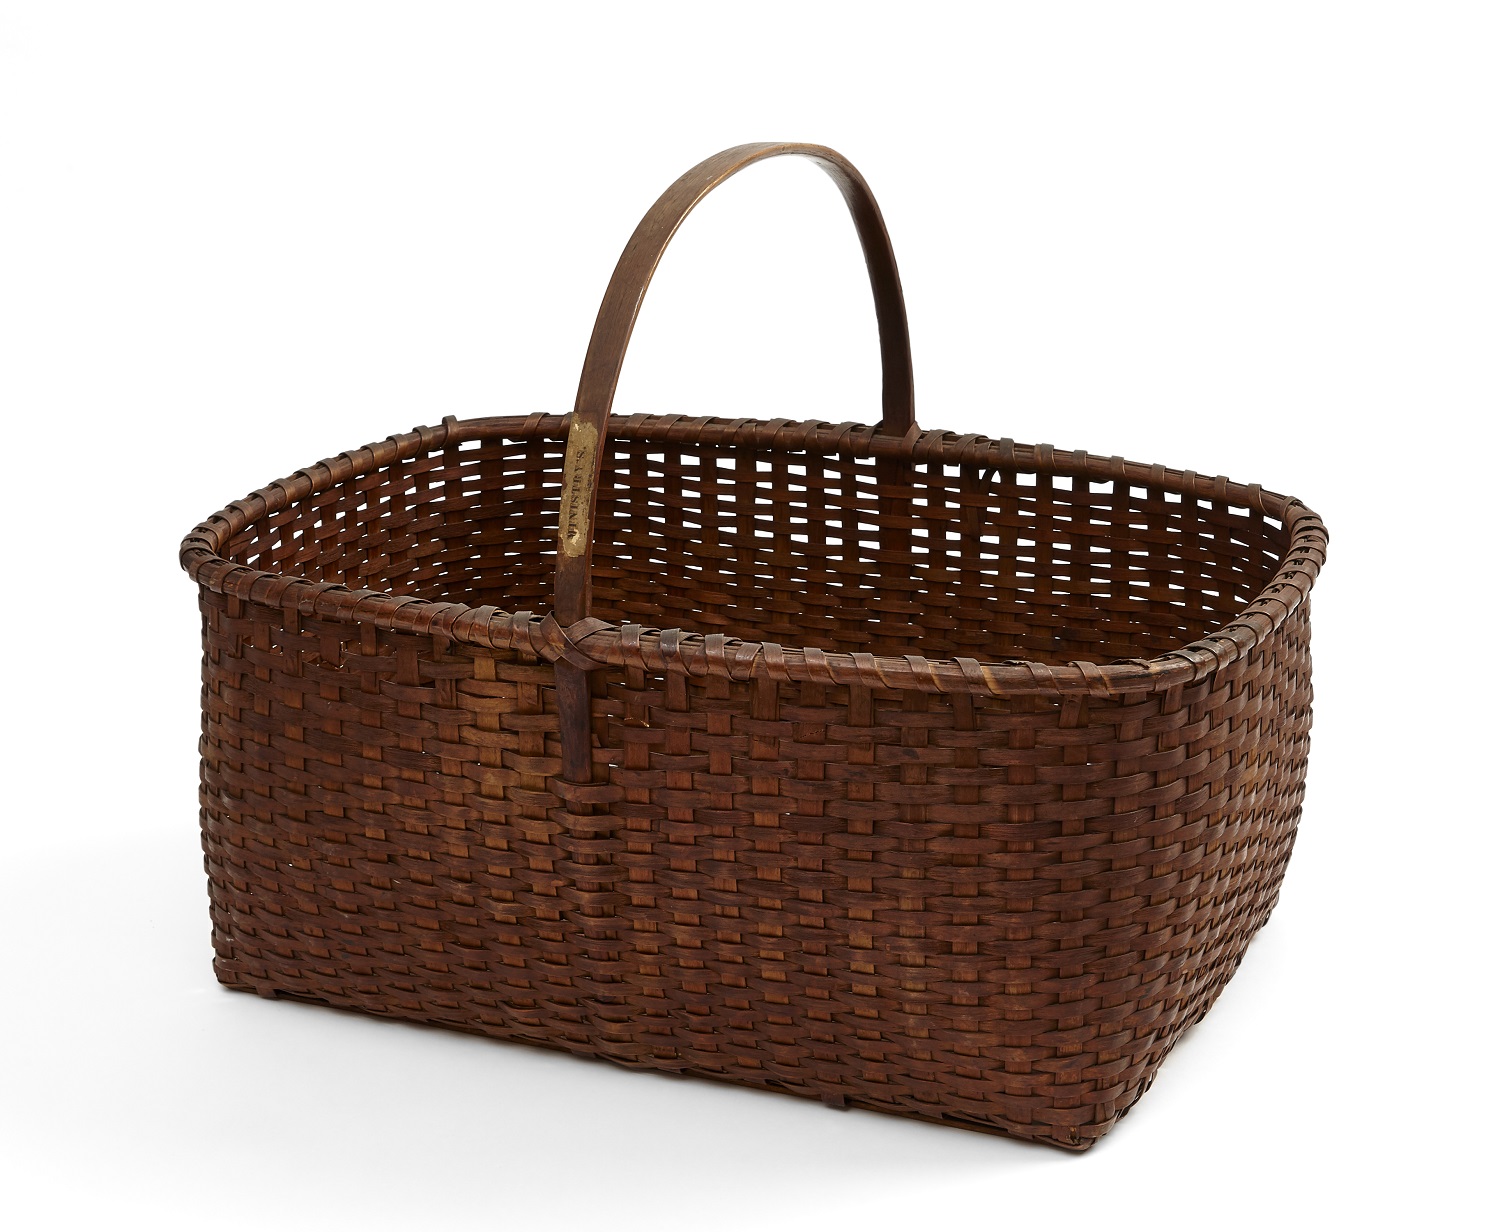 A brown wicker basket on a white background.